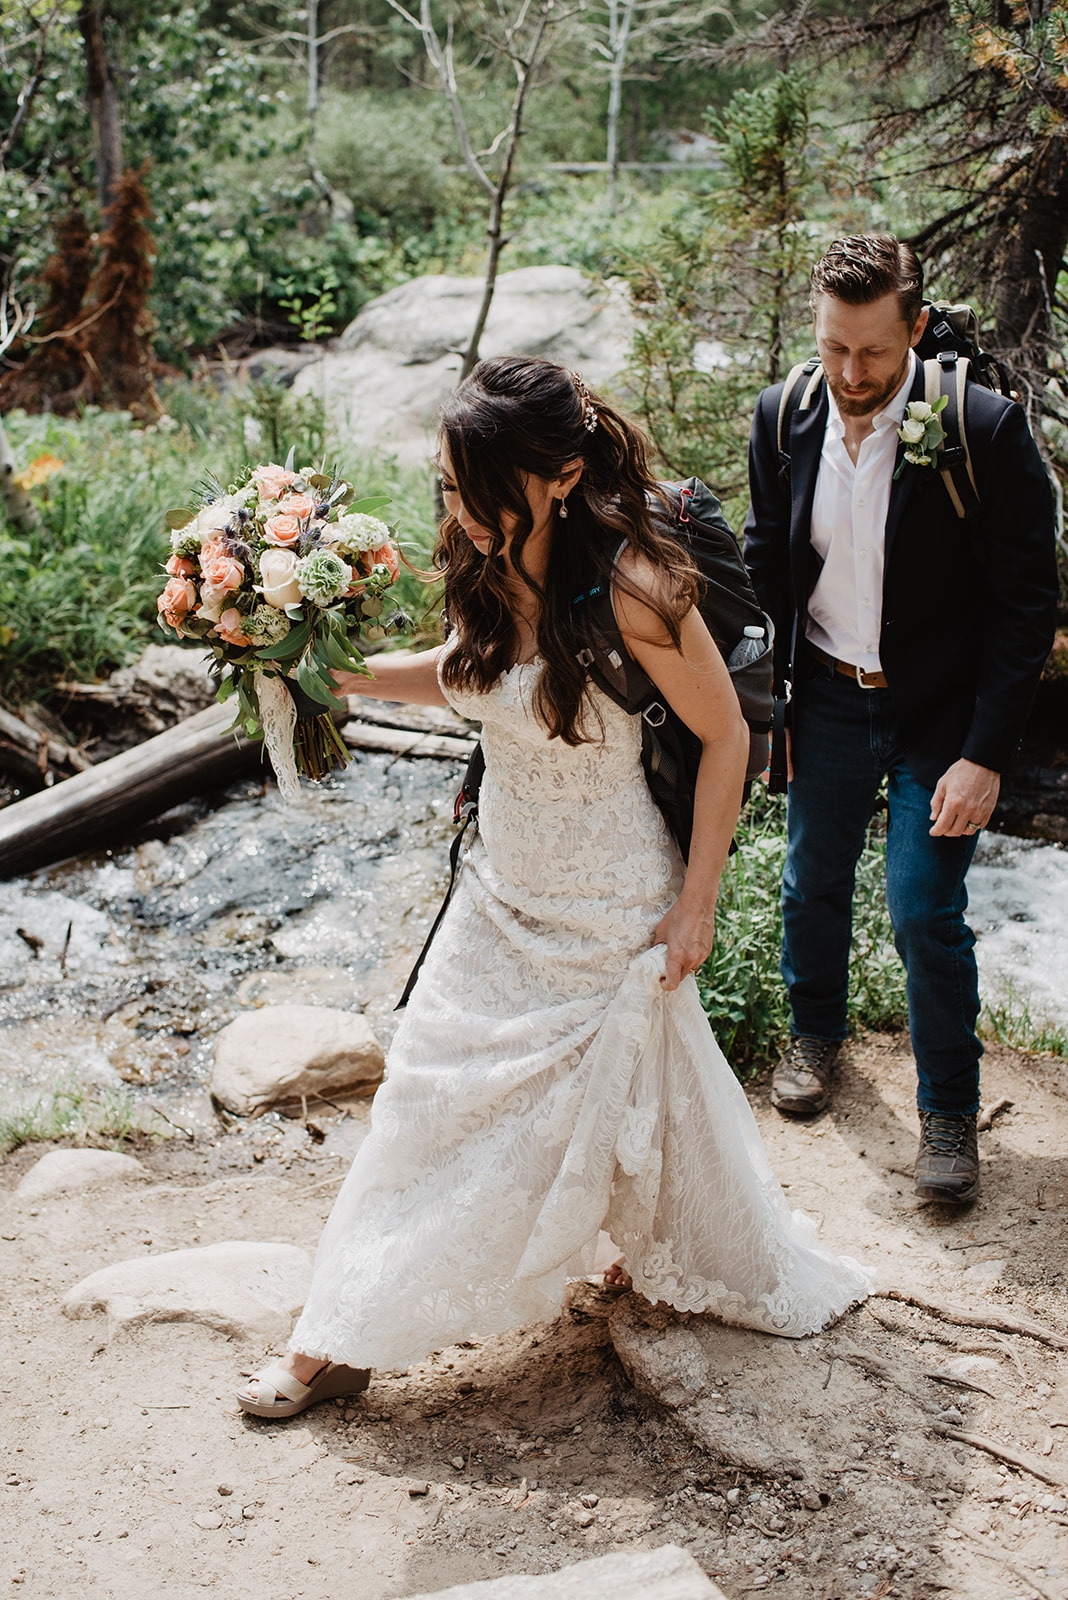 candid shot of bride and groom walking together on a hiking trail in their wedding gear and their backpacks on for their Taggart Lake weddings day